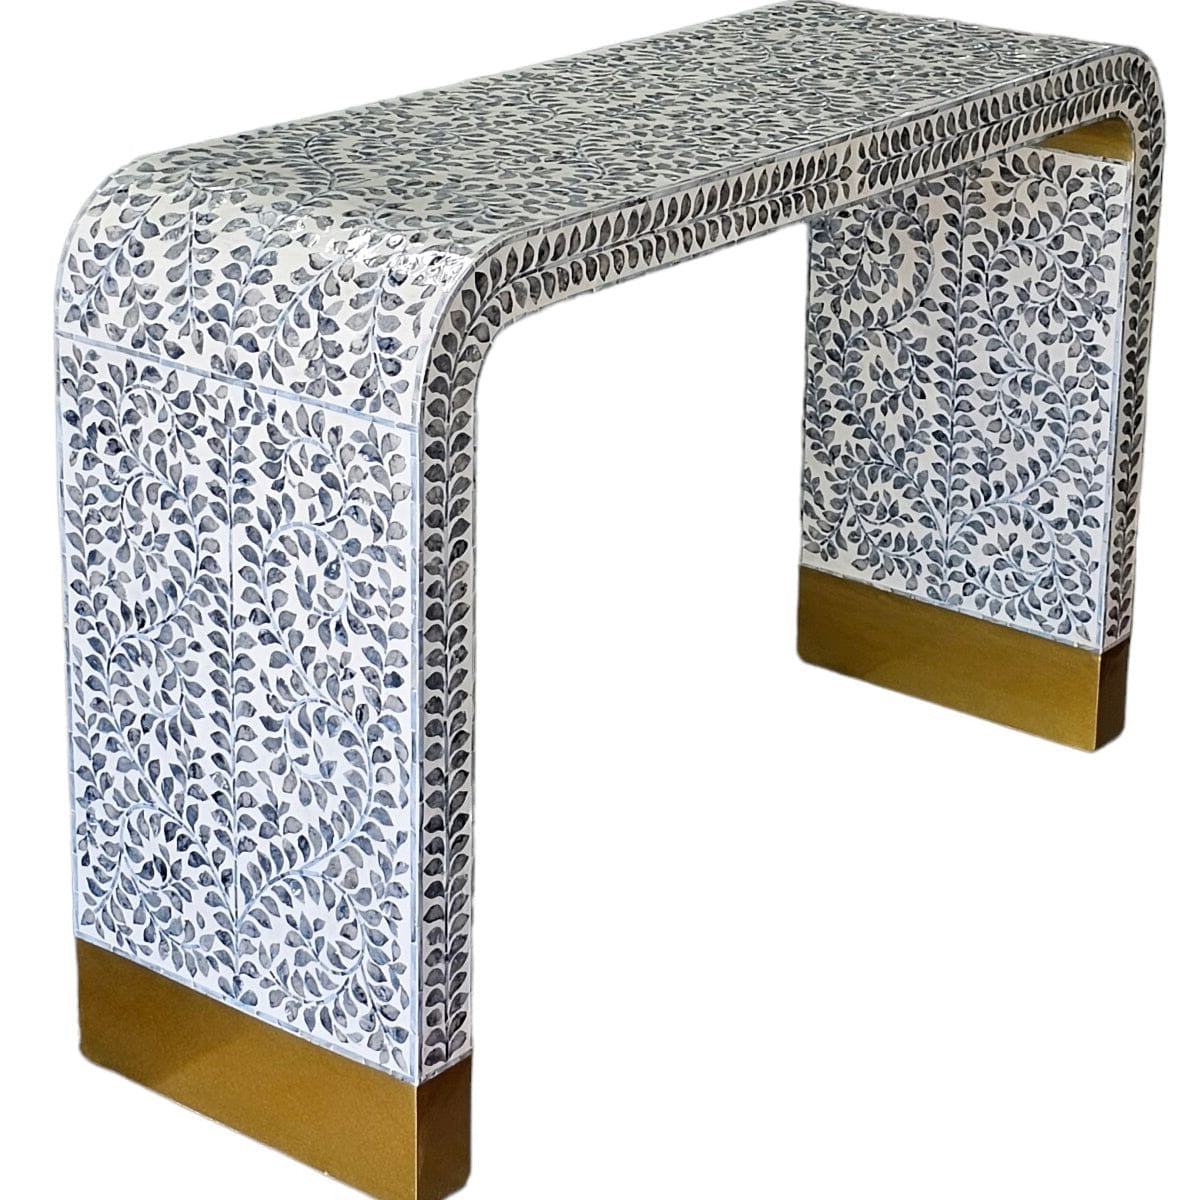 Mother of Pearl Console Table